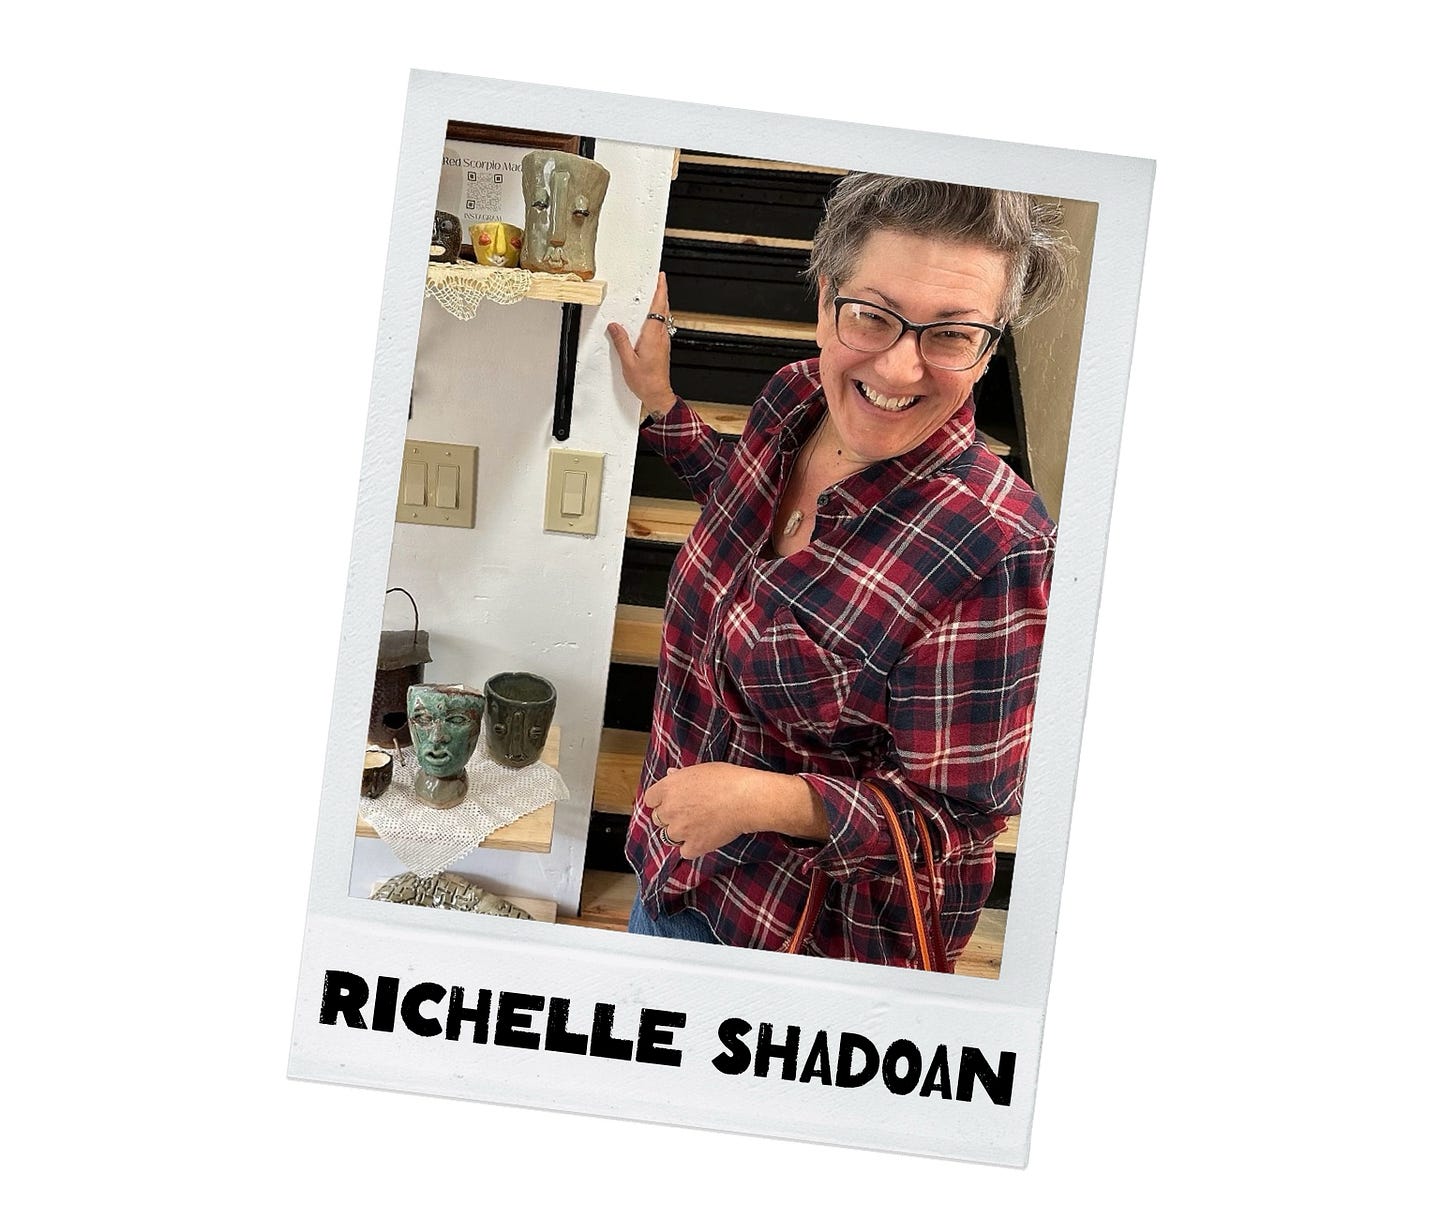 Richelle Shadoan smiles in front of shelves of her pottery - vases with faces. She is wearing a plaid flannel shirt.